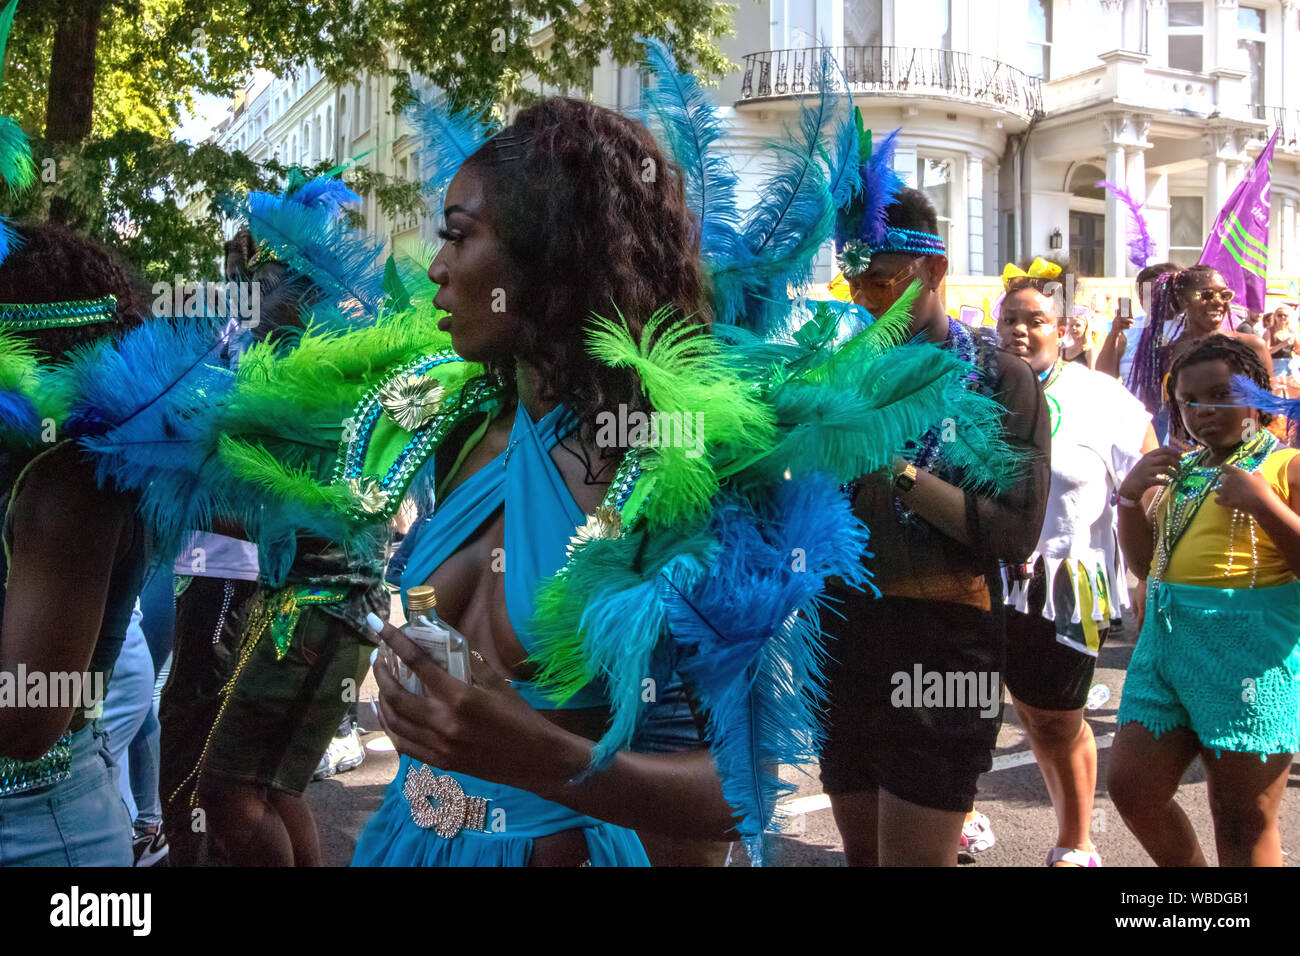 Masqueraders behind a truck during the celebration.The main events of Notting Hill Carnival 2019 got underway, with over a million revellers hitting the streets of West London, amongst floats, masqueraders, steel bands, and sound systems. Stock Photo